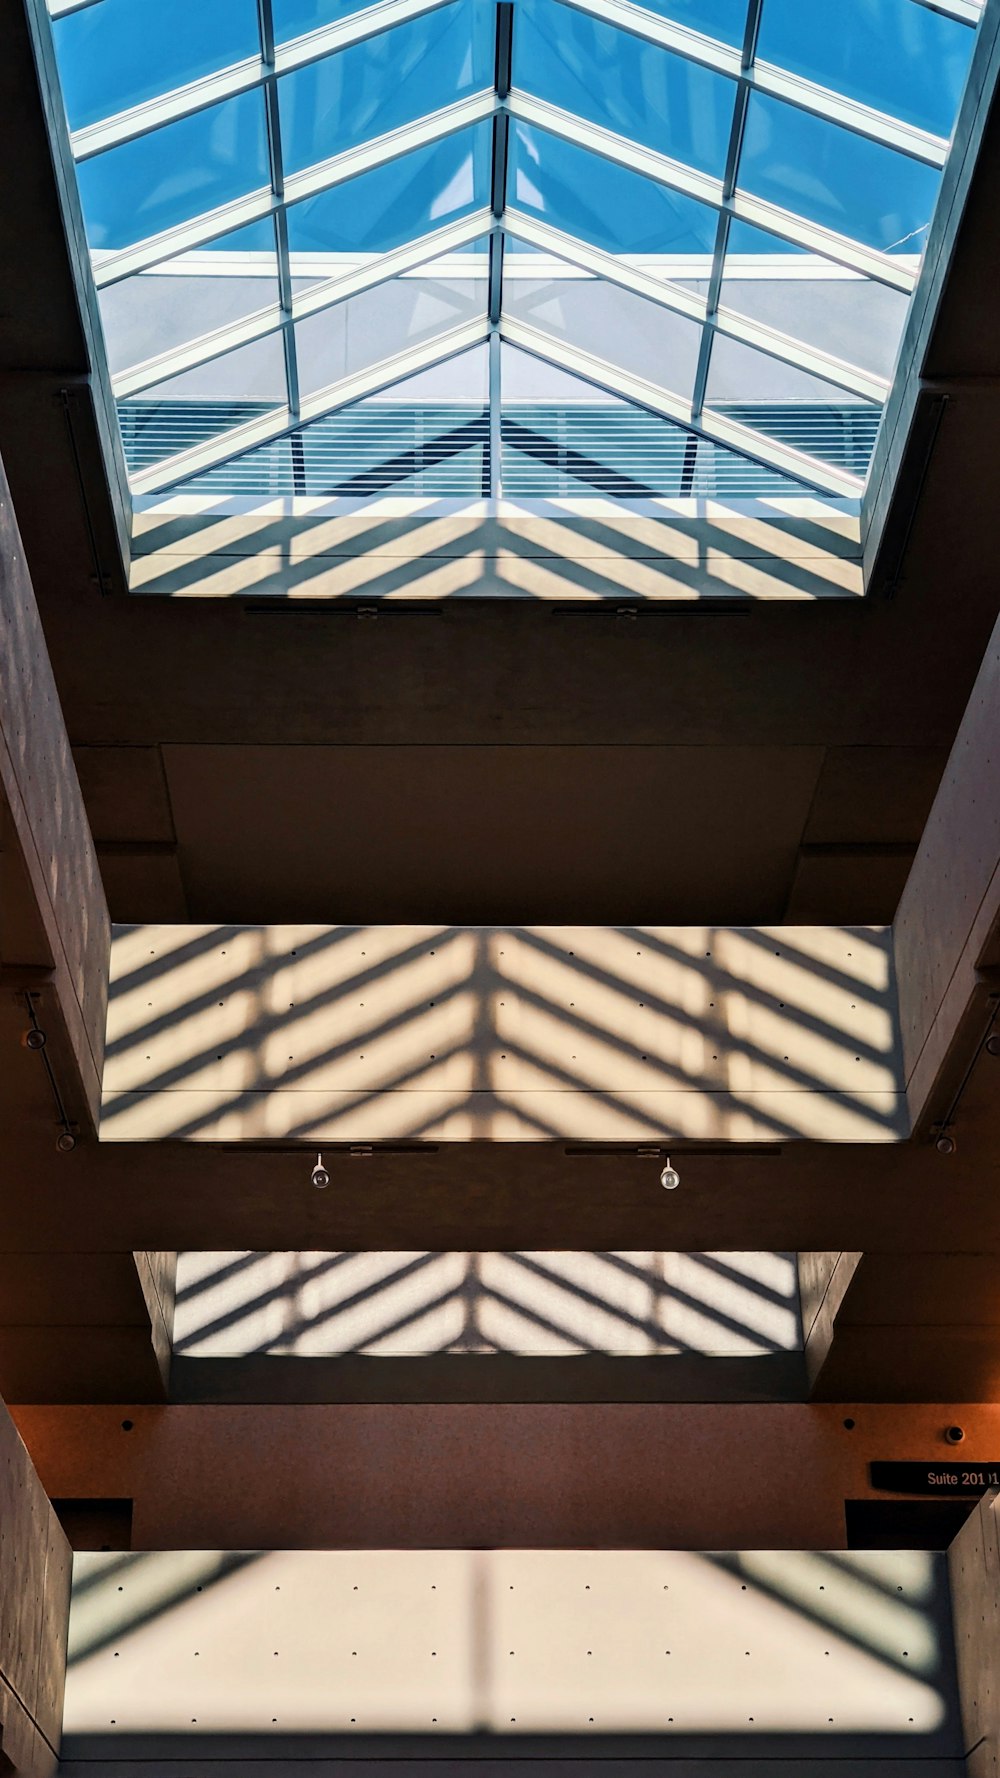 a view of the ceiling of a building with a skylight